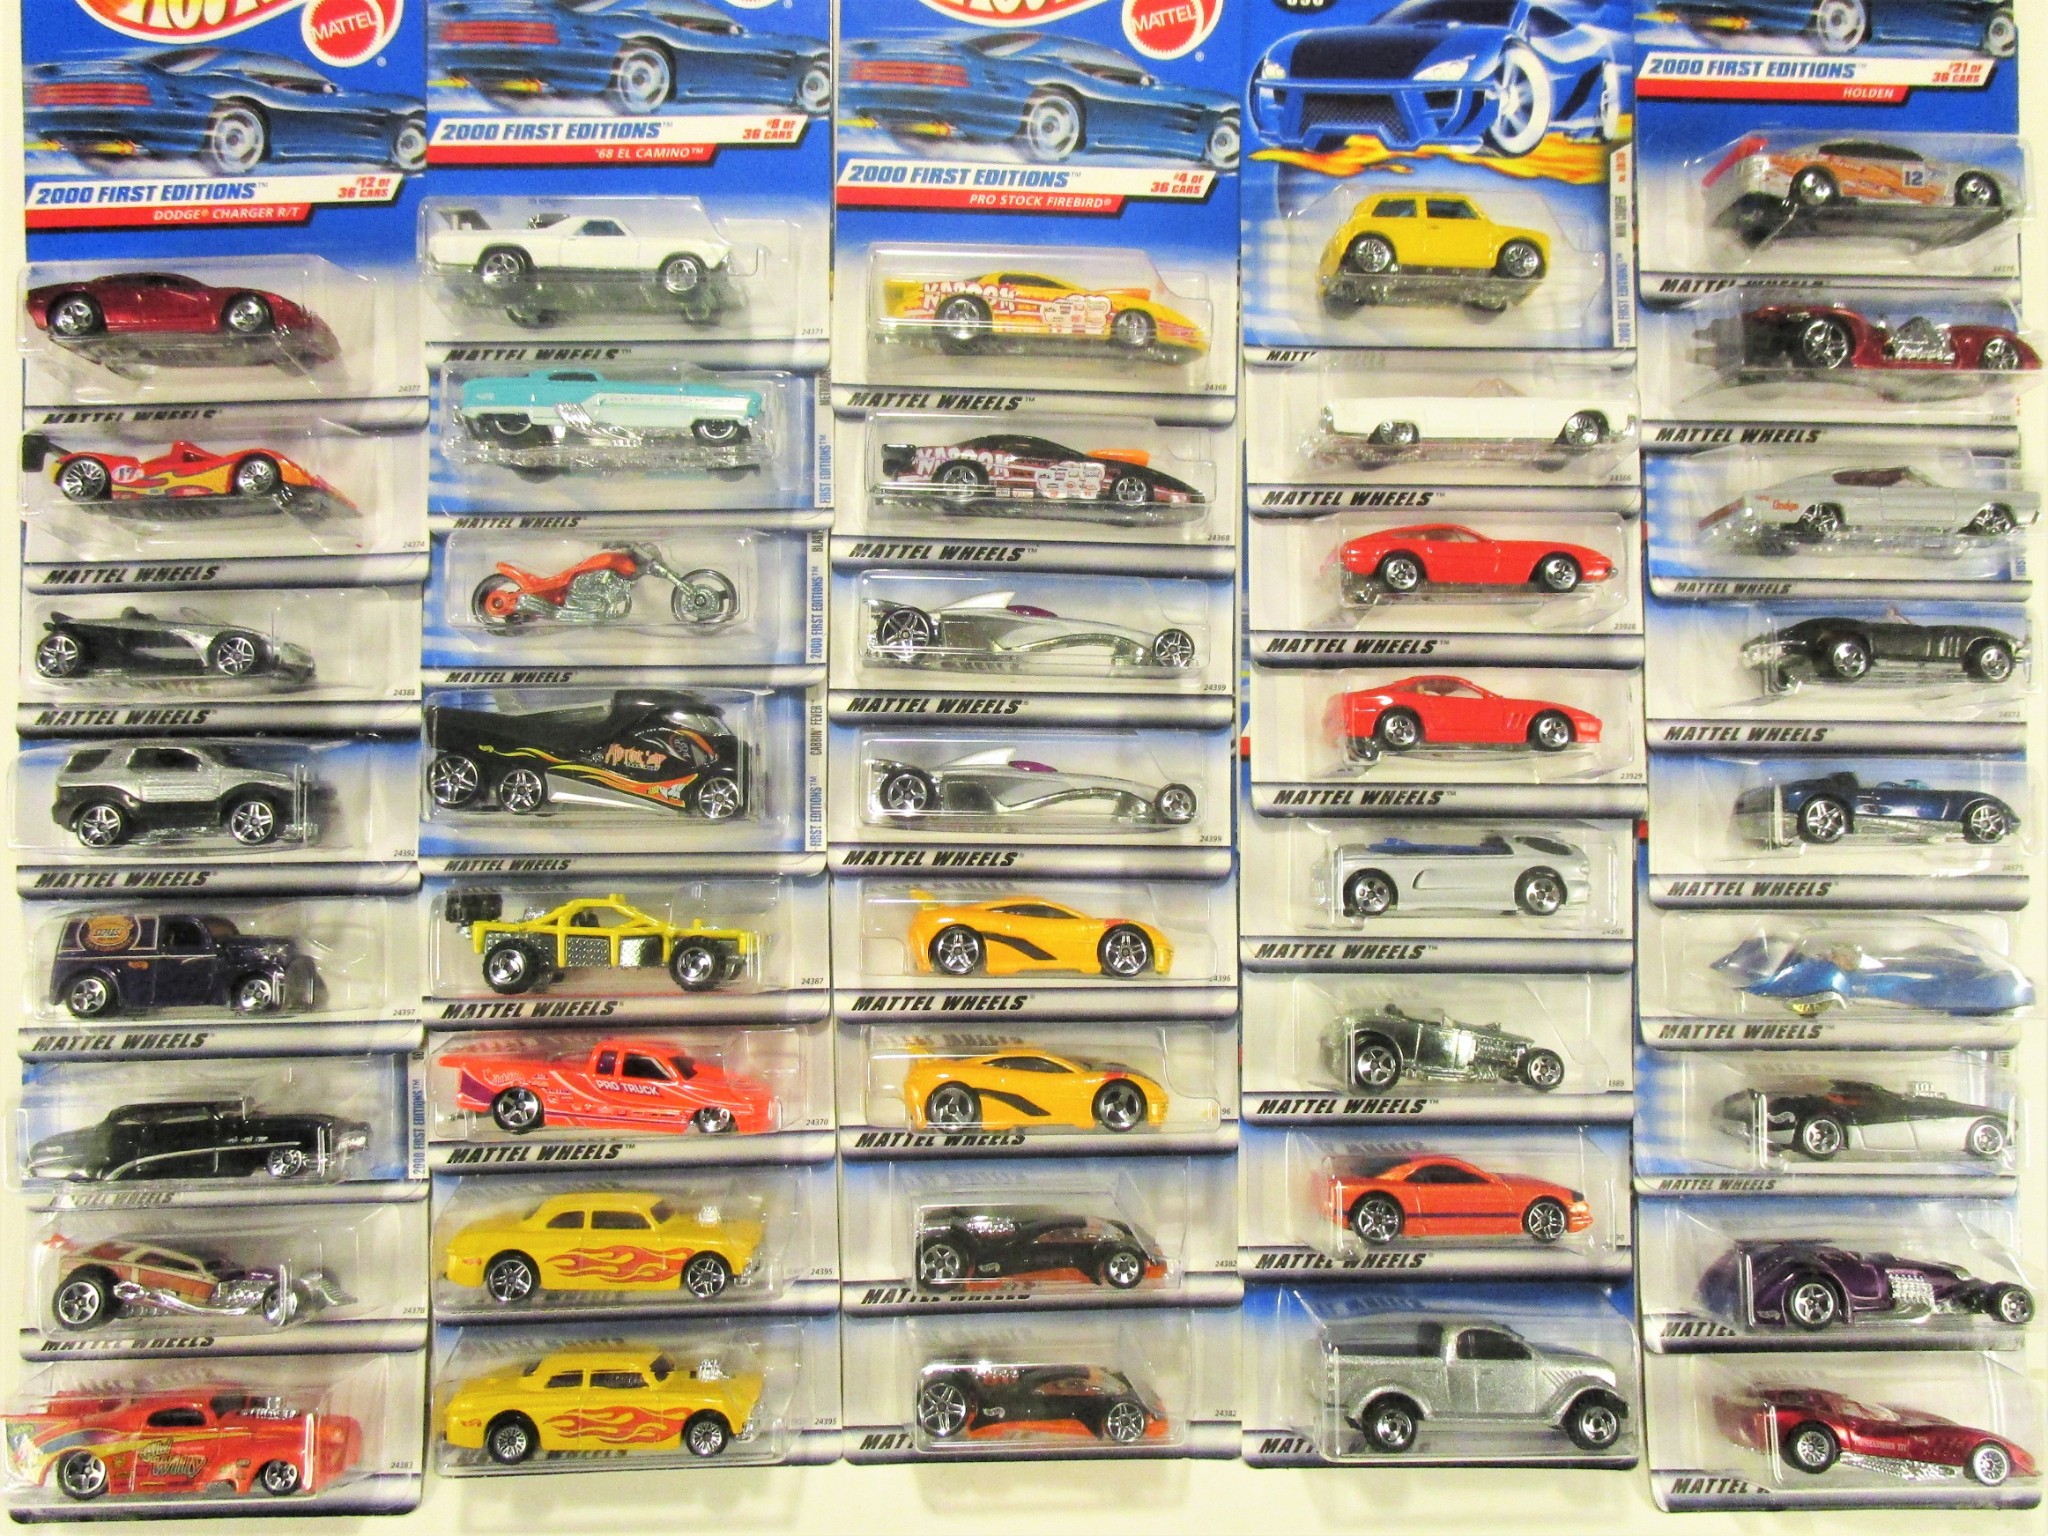 hot wheels 2000 first editions